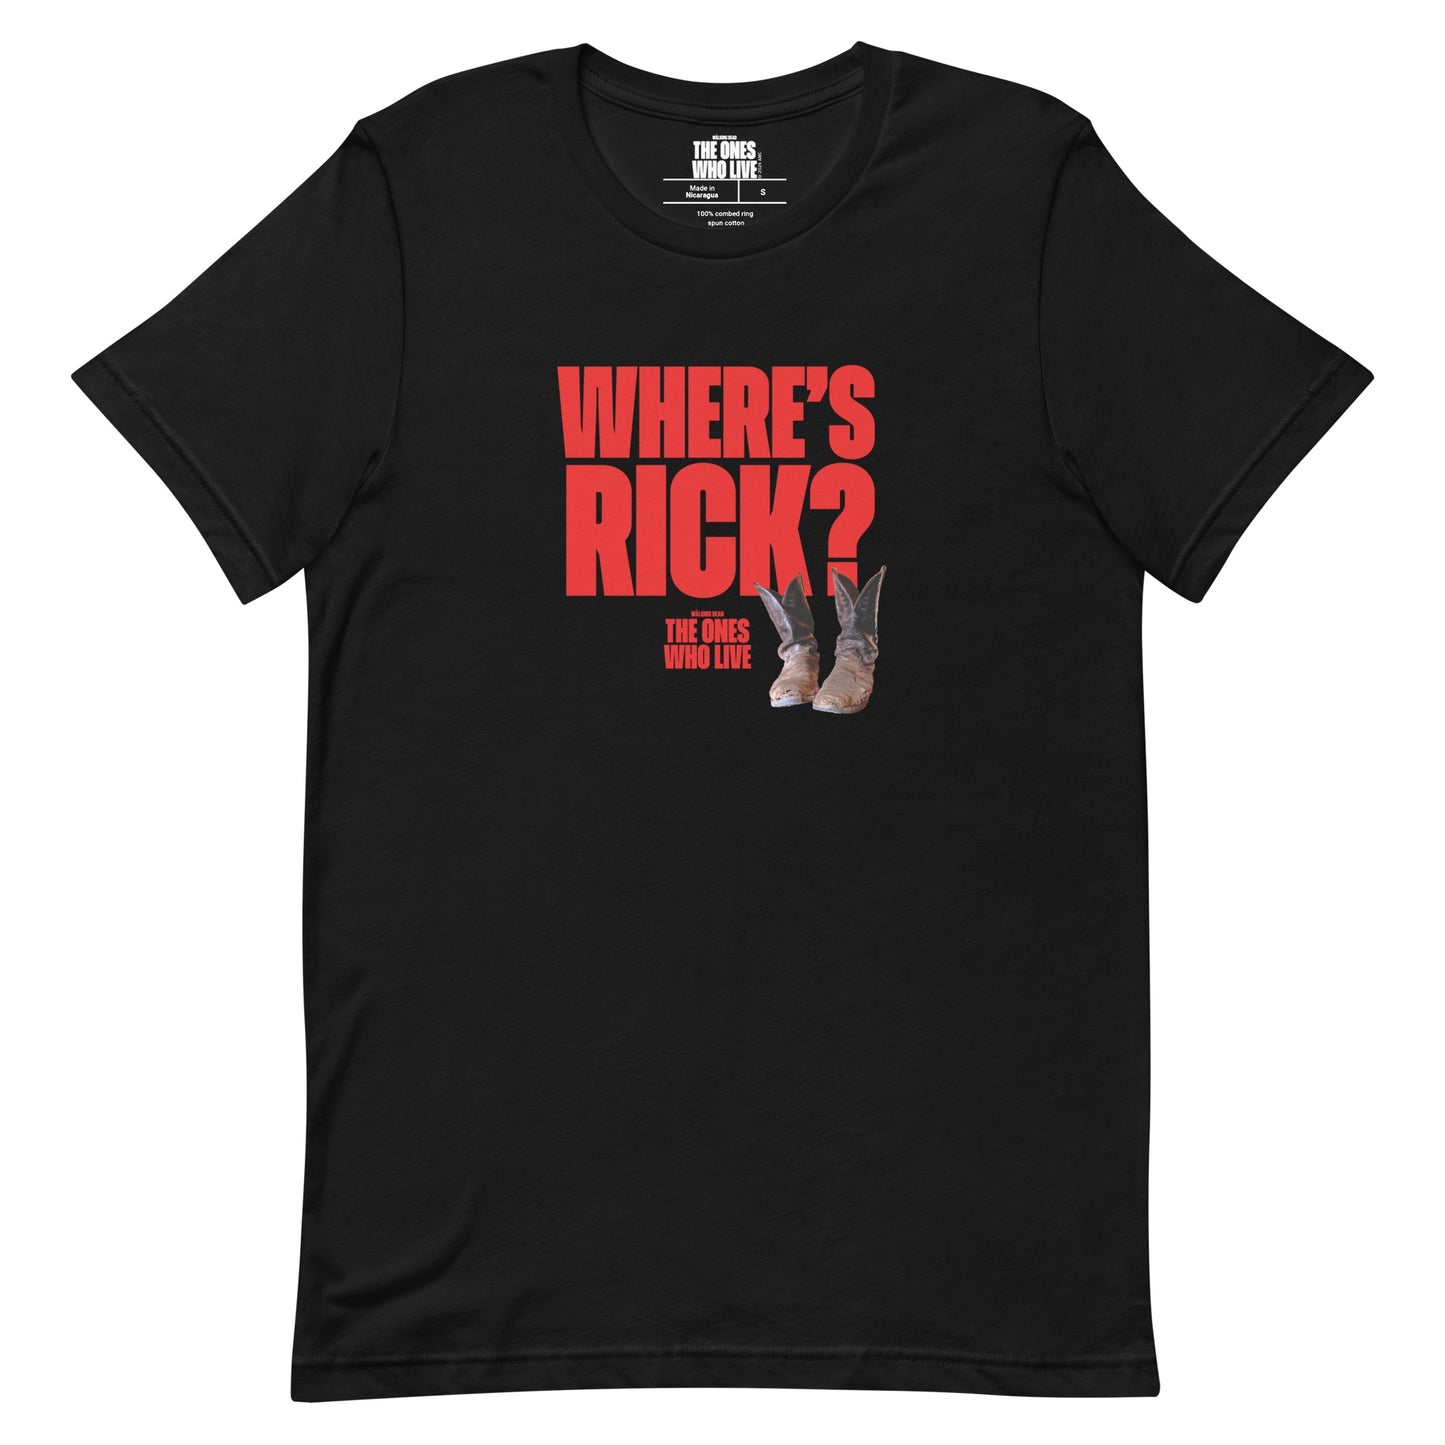 The Walking Dead: The Ones Who Live Where's Rick? Boots Adult T-shirt